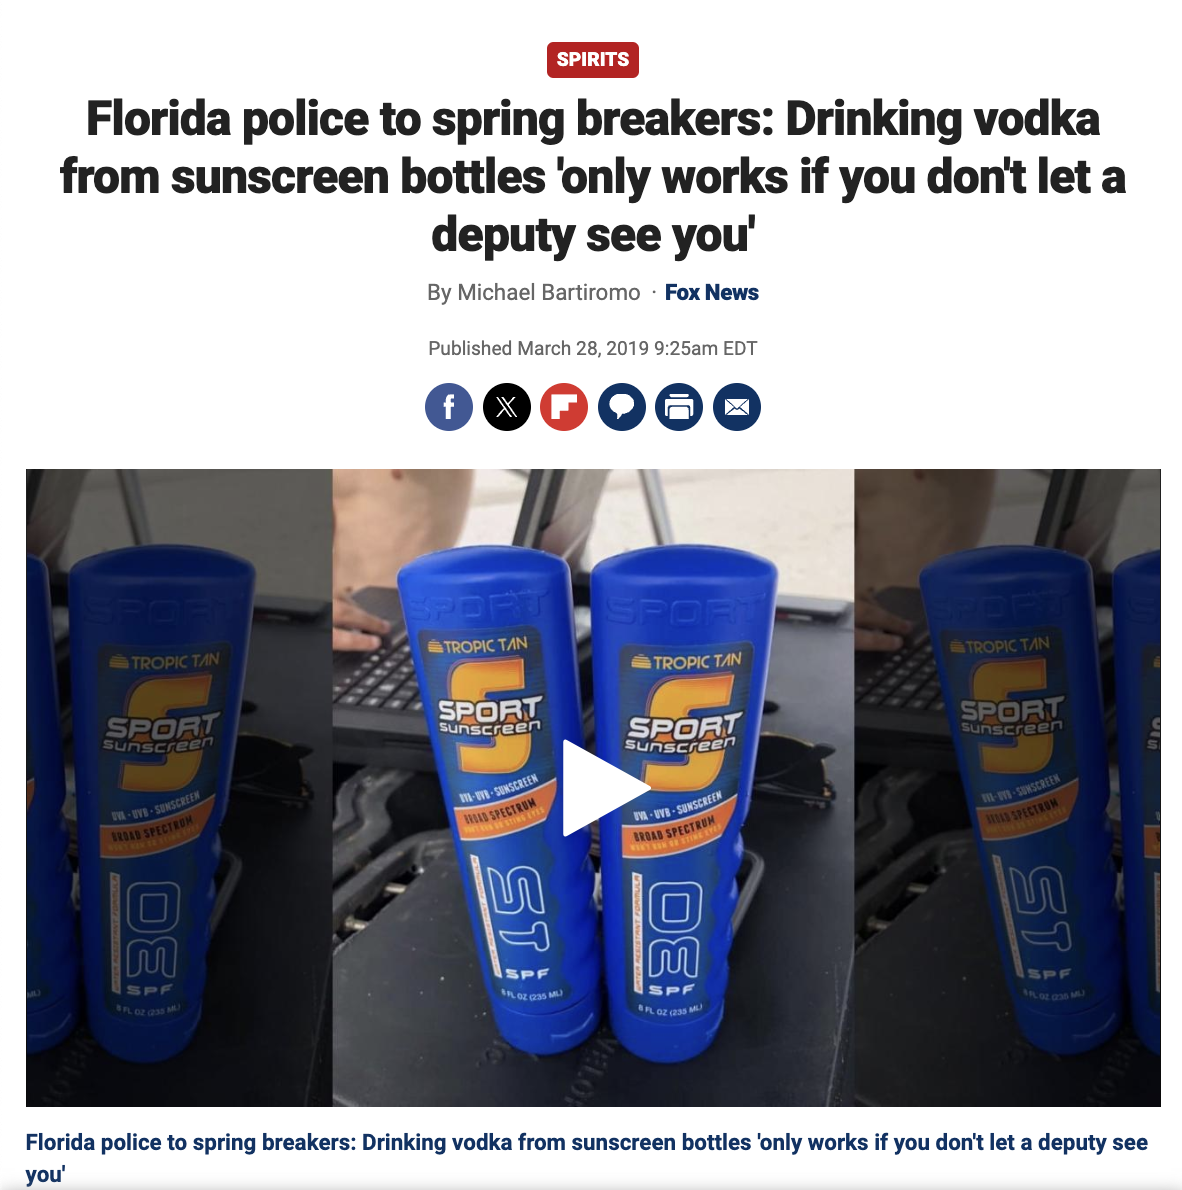 display advertising - Spirits Florida police to spring breakers Drinking vodka from sunscreen bottles 'only works if you don't let a deputy see you' By Michael Bartiromo Fox News Published am Edt Tropic Tropic Tan Tropic Tan Assonctan Sport Sunscre Sport 